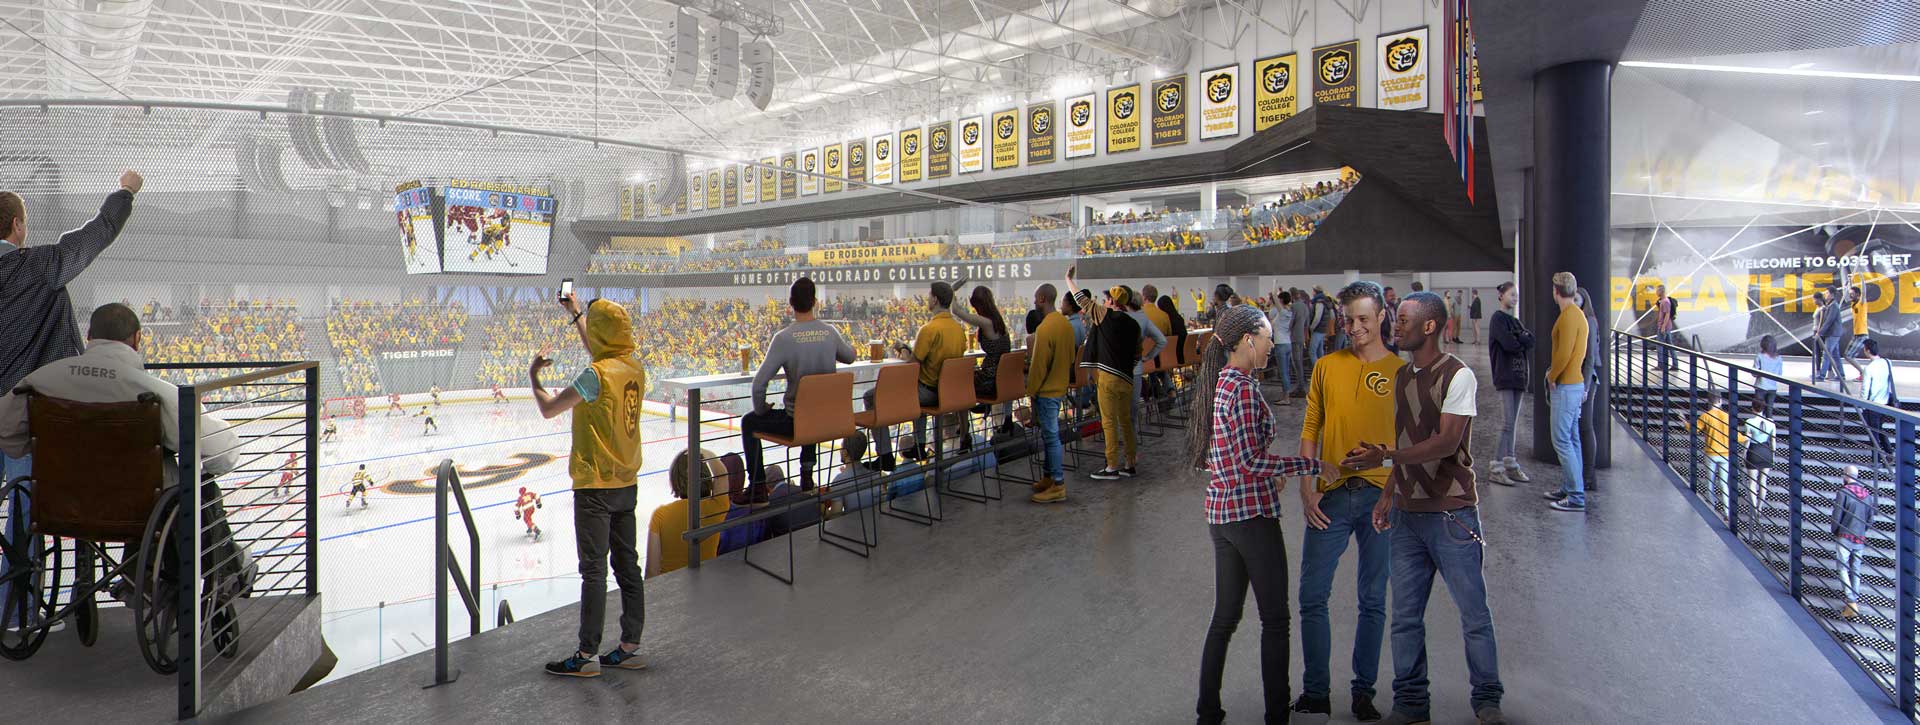 Concourse level of Ed Robson Arena; architectural rendering by JLG Architects